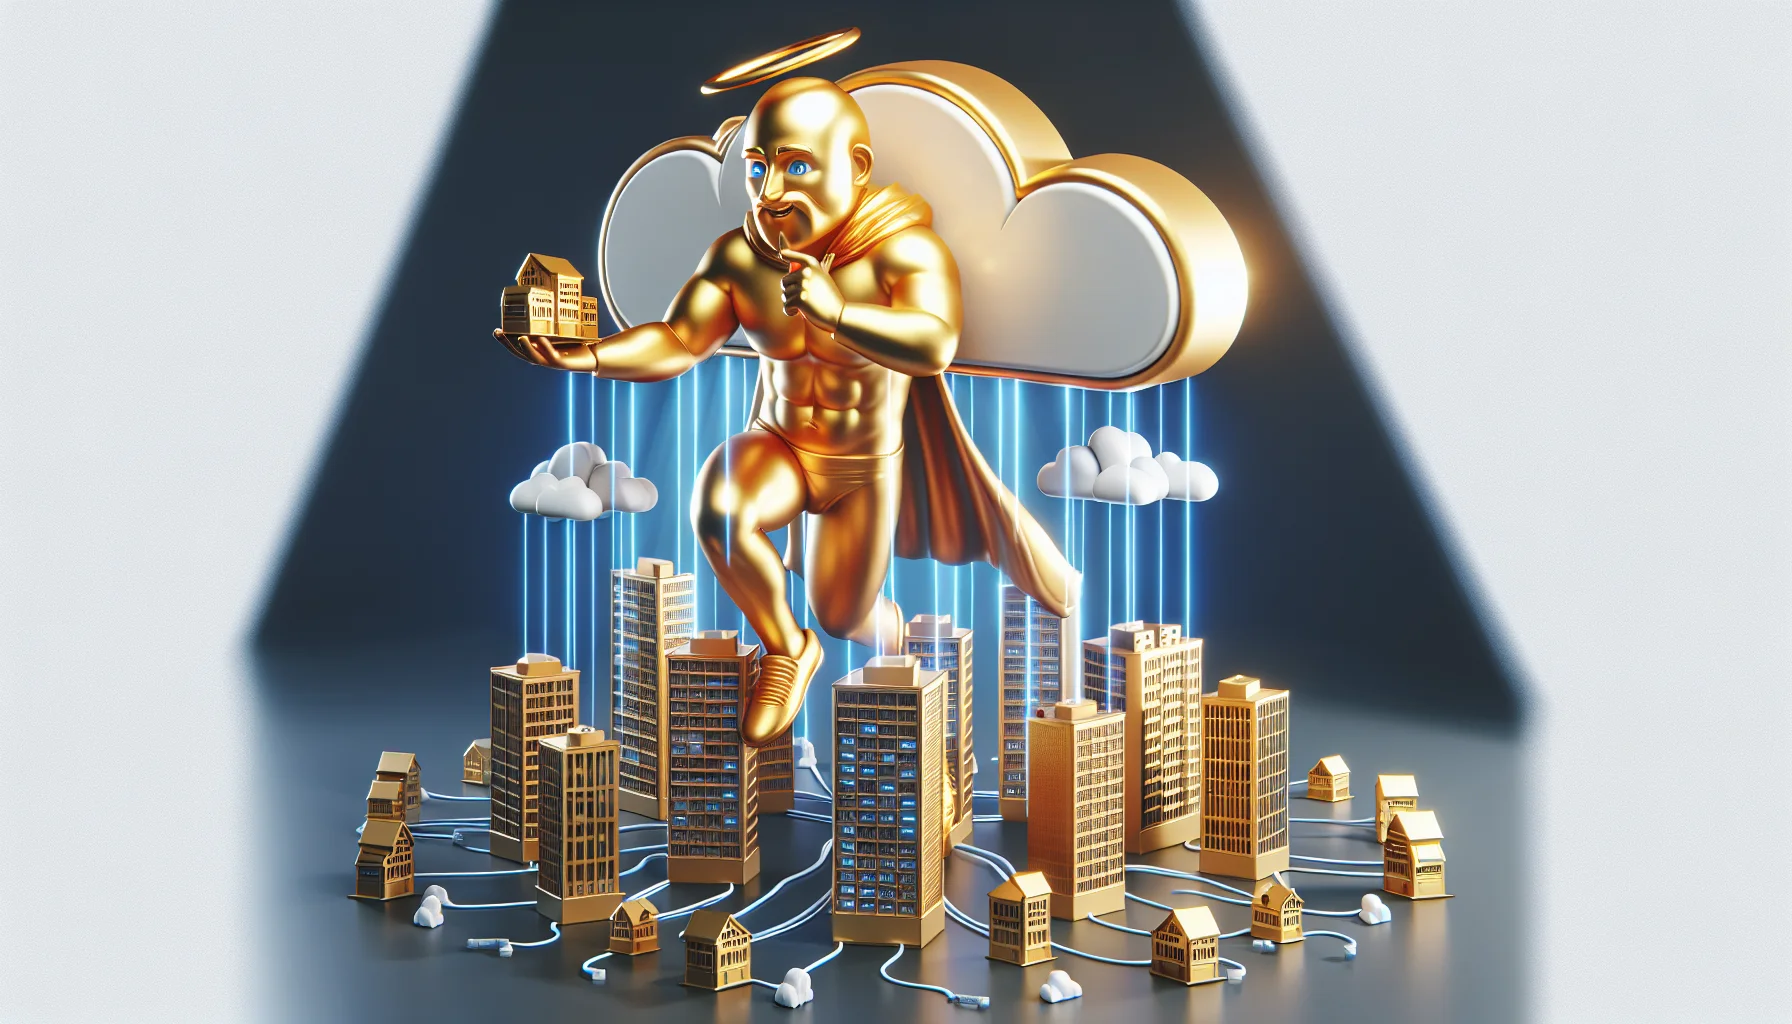 Create a humorous and realistic image of a golden mascot man akin to a deity, symbolizing the concept of 'good as gold', engaging in a compelling scenario demonstrating web hosting. The mascot could be efficiently managing a stack of websites, characterized as miniature buildings, in a divine way which appears like he is handling the web of the cosmos. Display a cloud framework to depict the cloud hosting concept, with data lines connecting the mascot to the miniature buildings, showing the smooth flow of information.